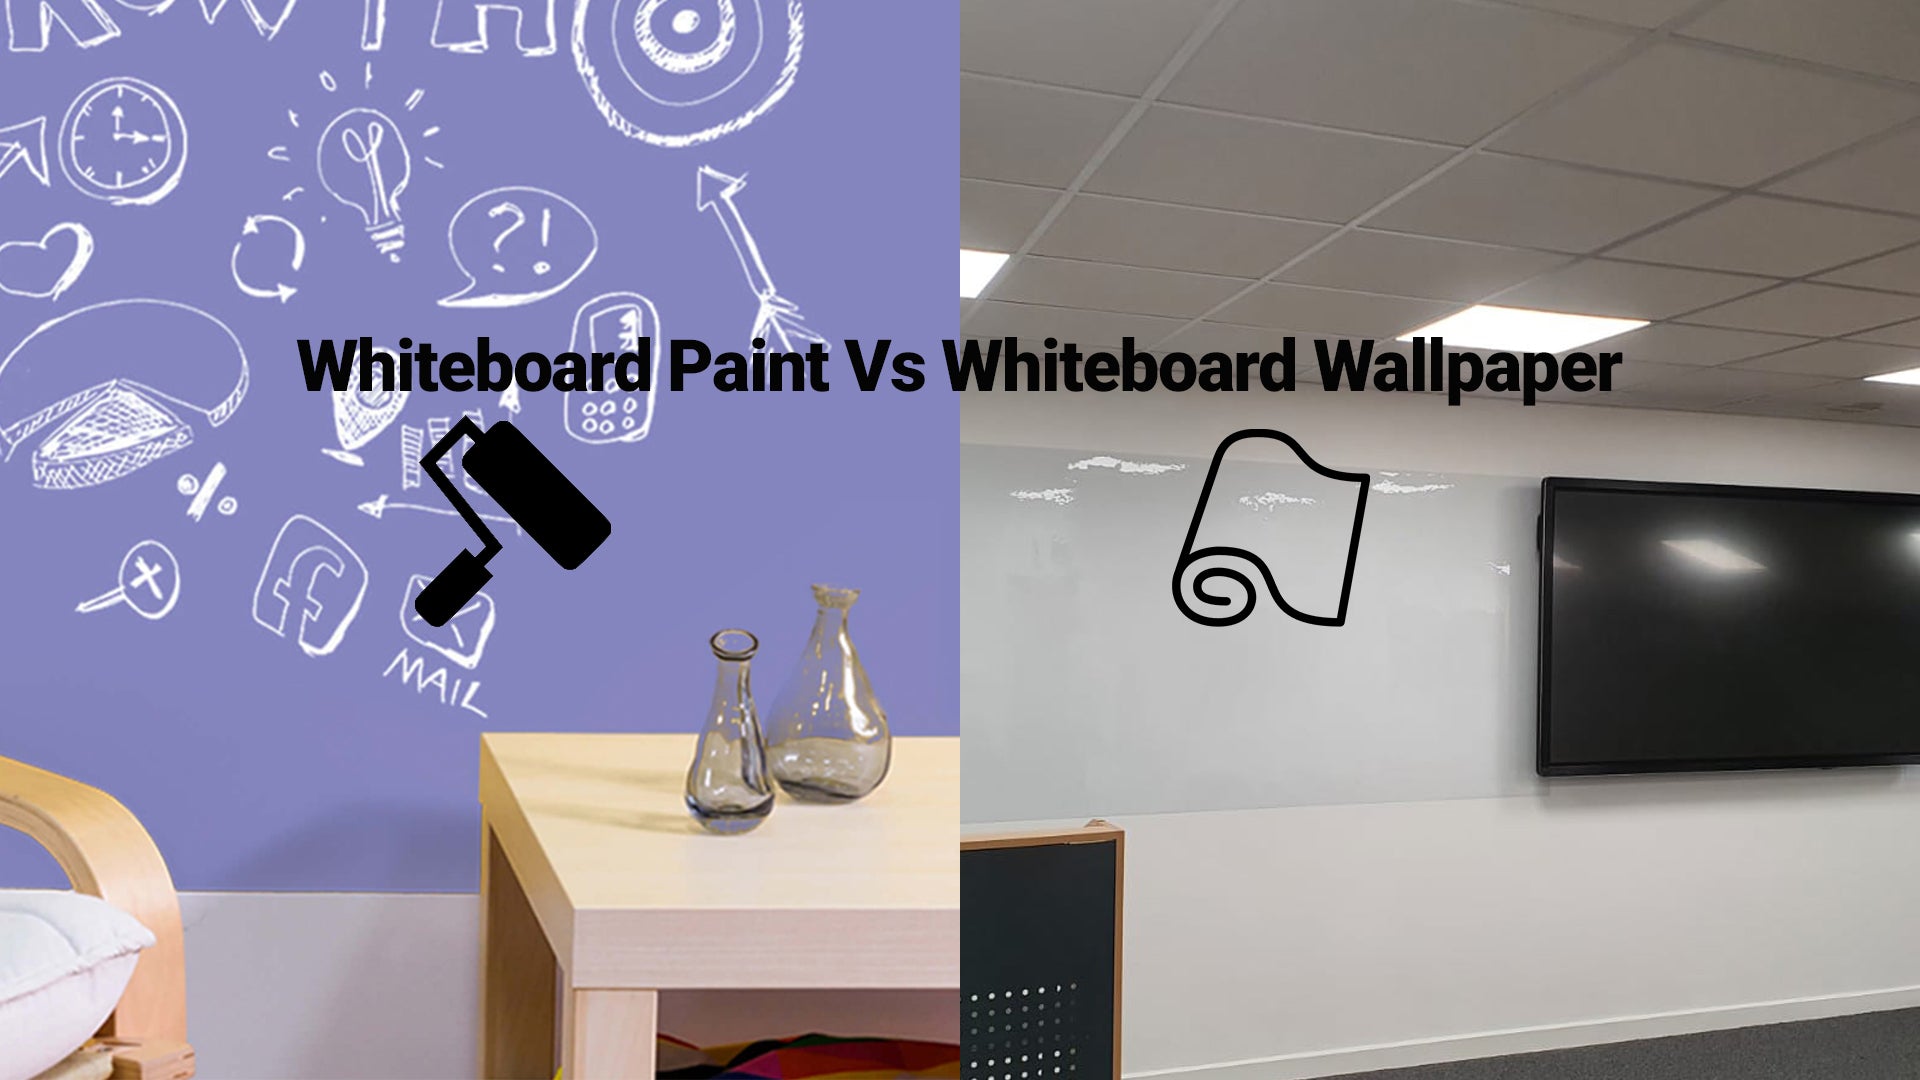 Buying Guide - Whiteboard Paint or Whiteboard Wallpaper